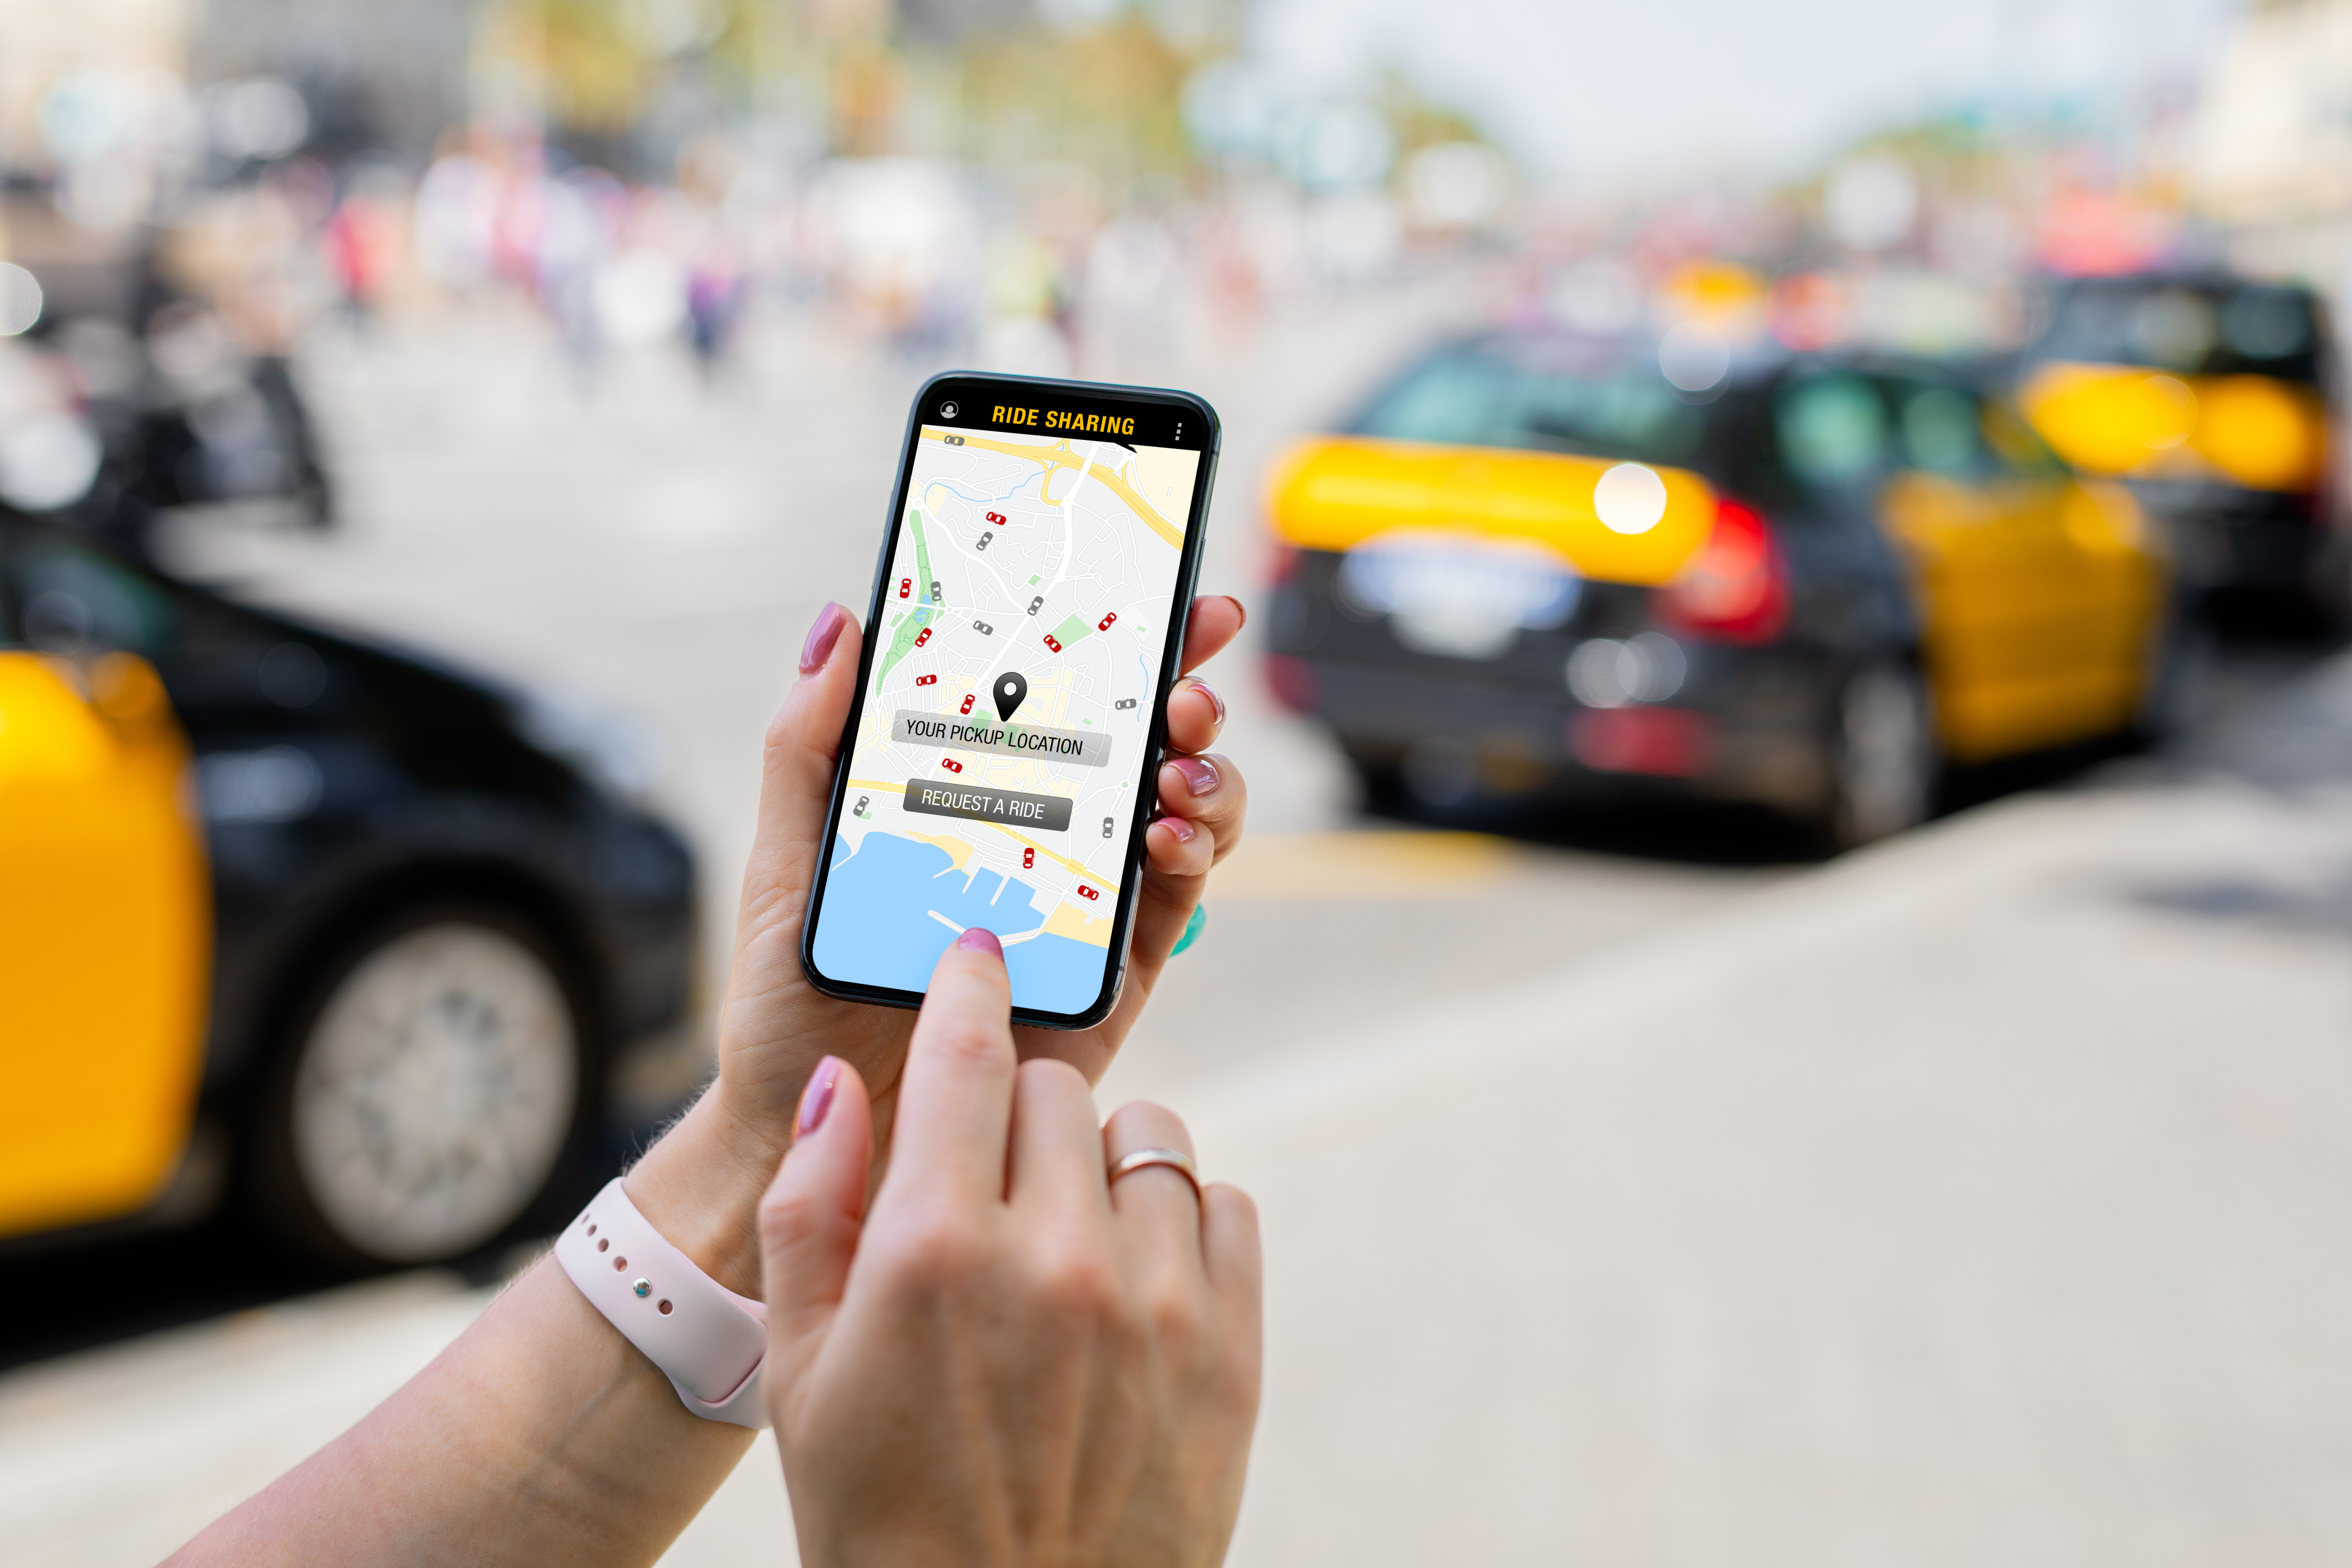 Chinese authorities have significantly reduced fines slapped on those who provide unlicensed ride-hailing services. Photo: Shutterstock